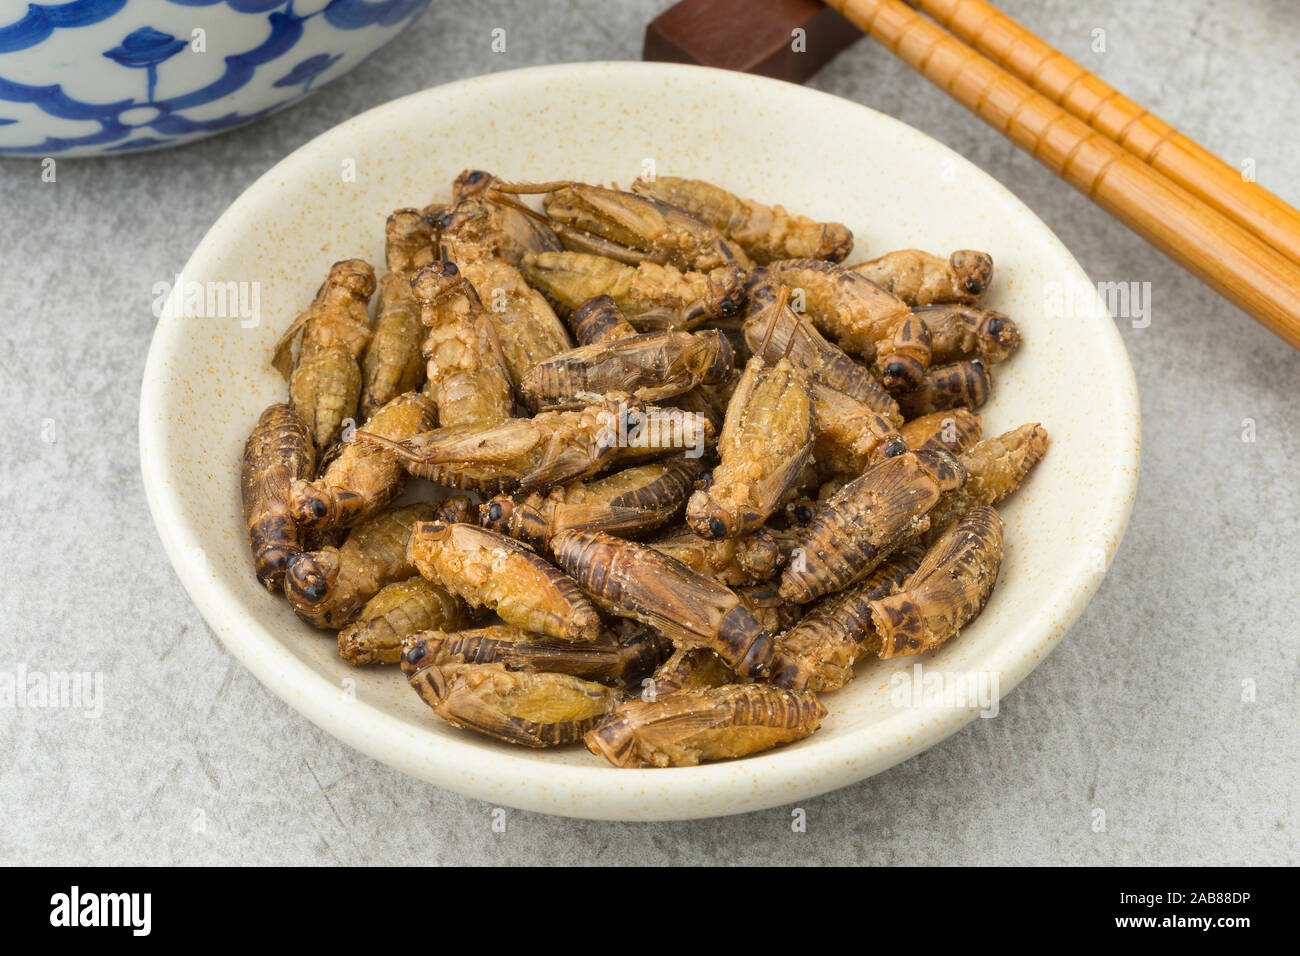 Dish with crispy small crickets for a snack Stock Photo